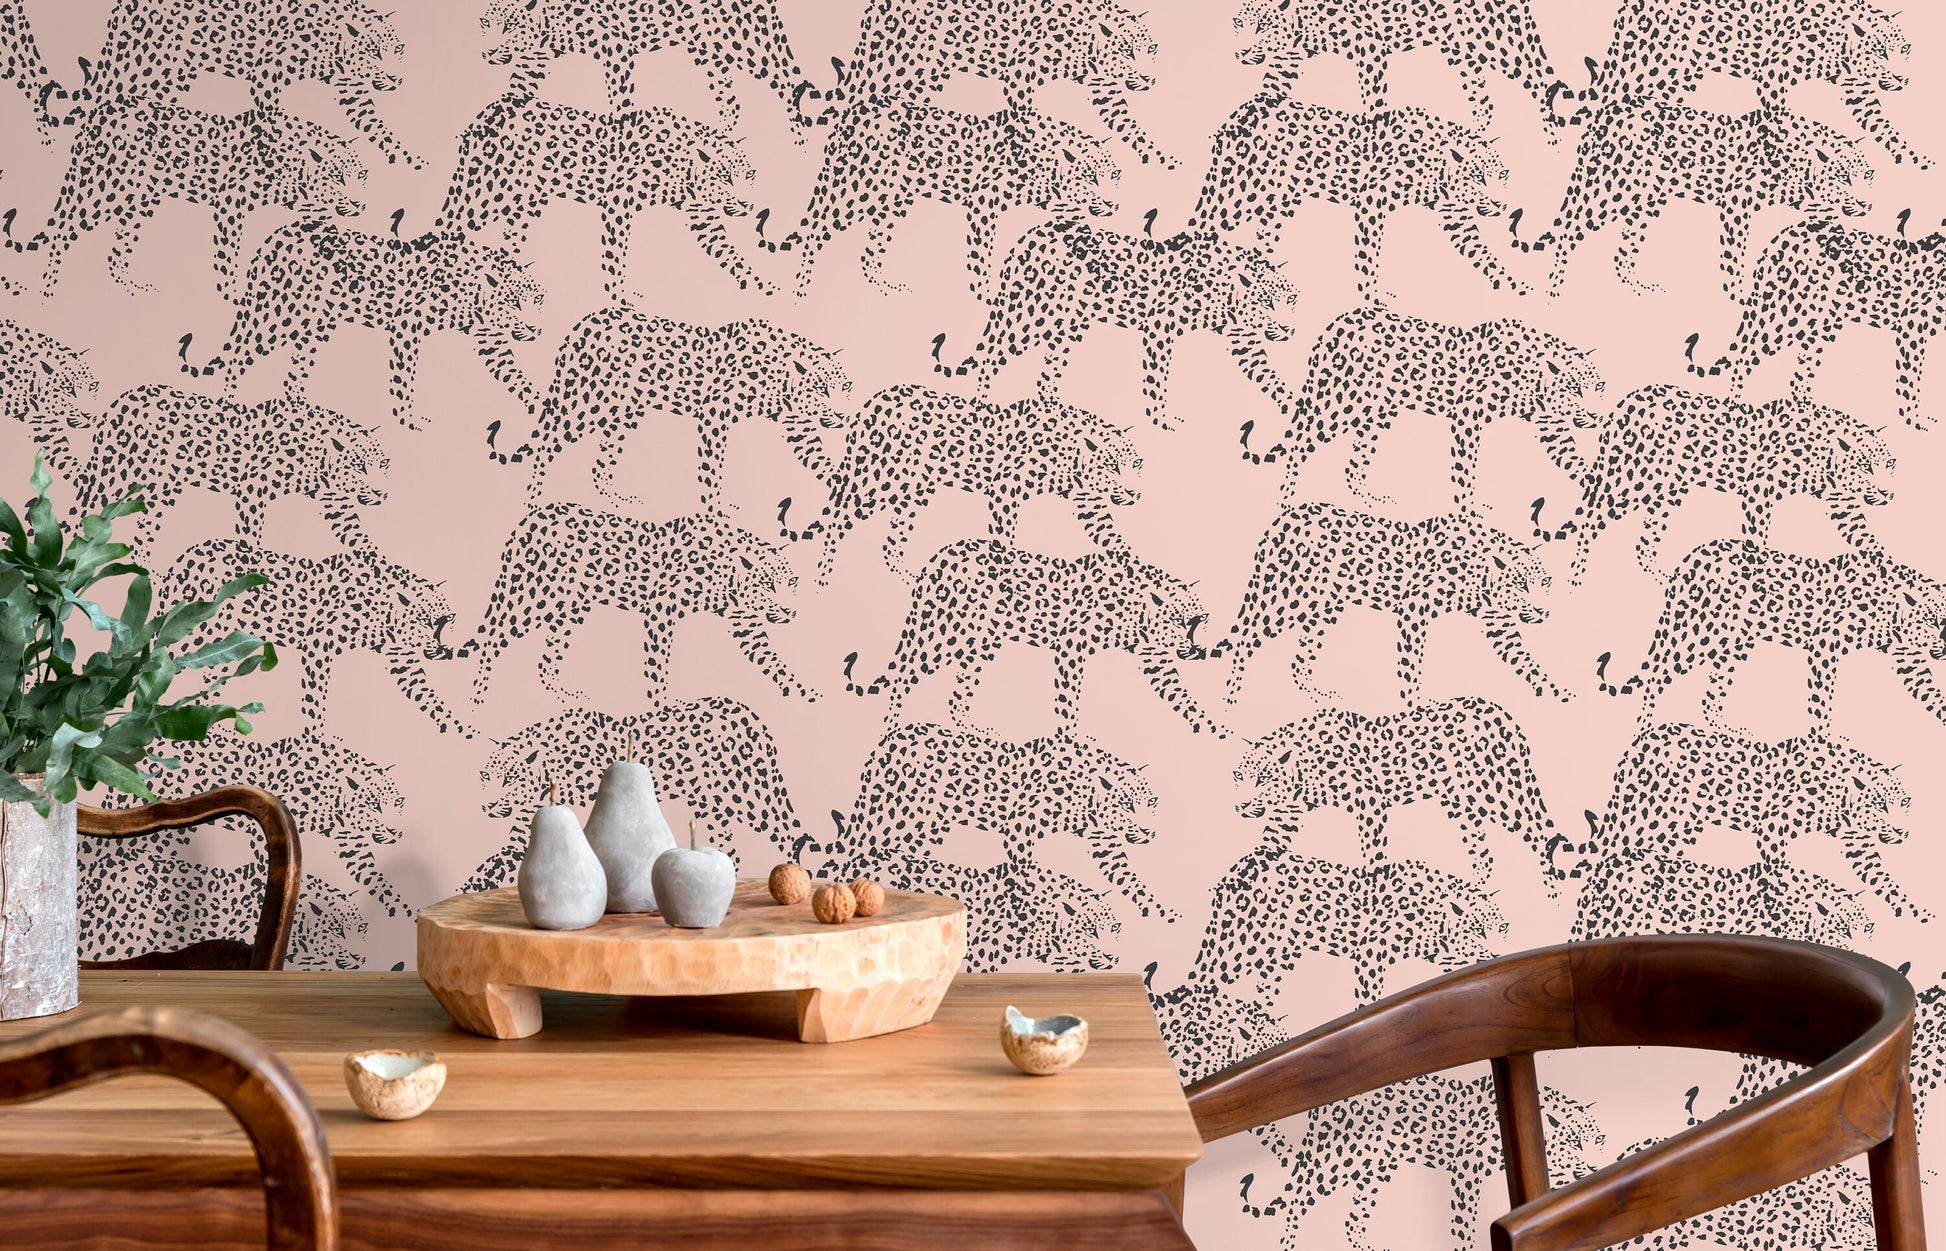 Pink Boho Cheetah Wallpaper Removable and Repositionable Peel and Stick or Traditional Pre-pasted Wallpaper - ZADM